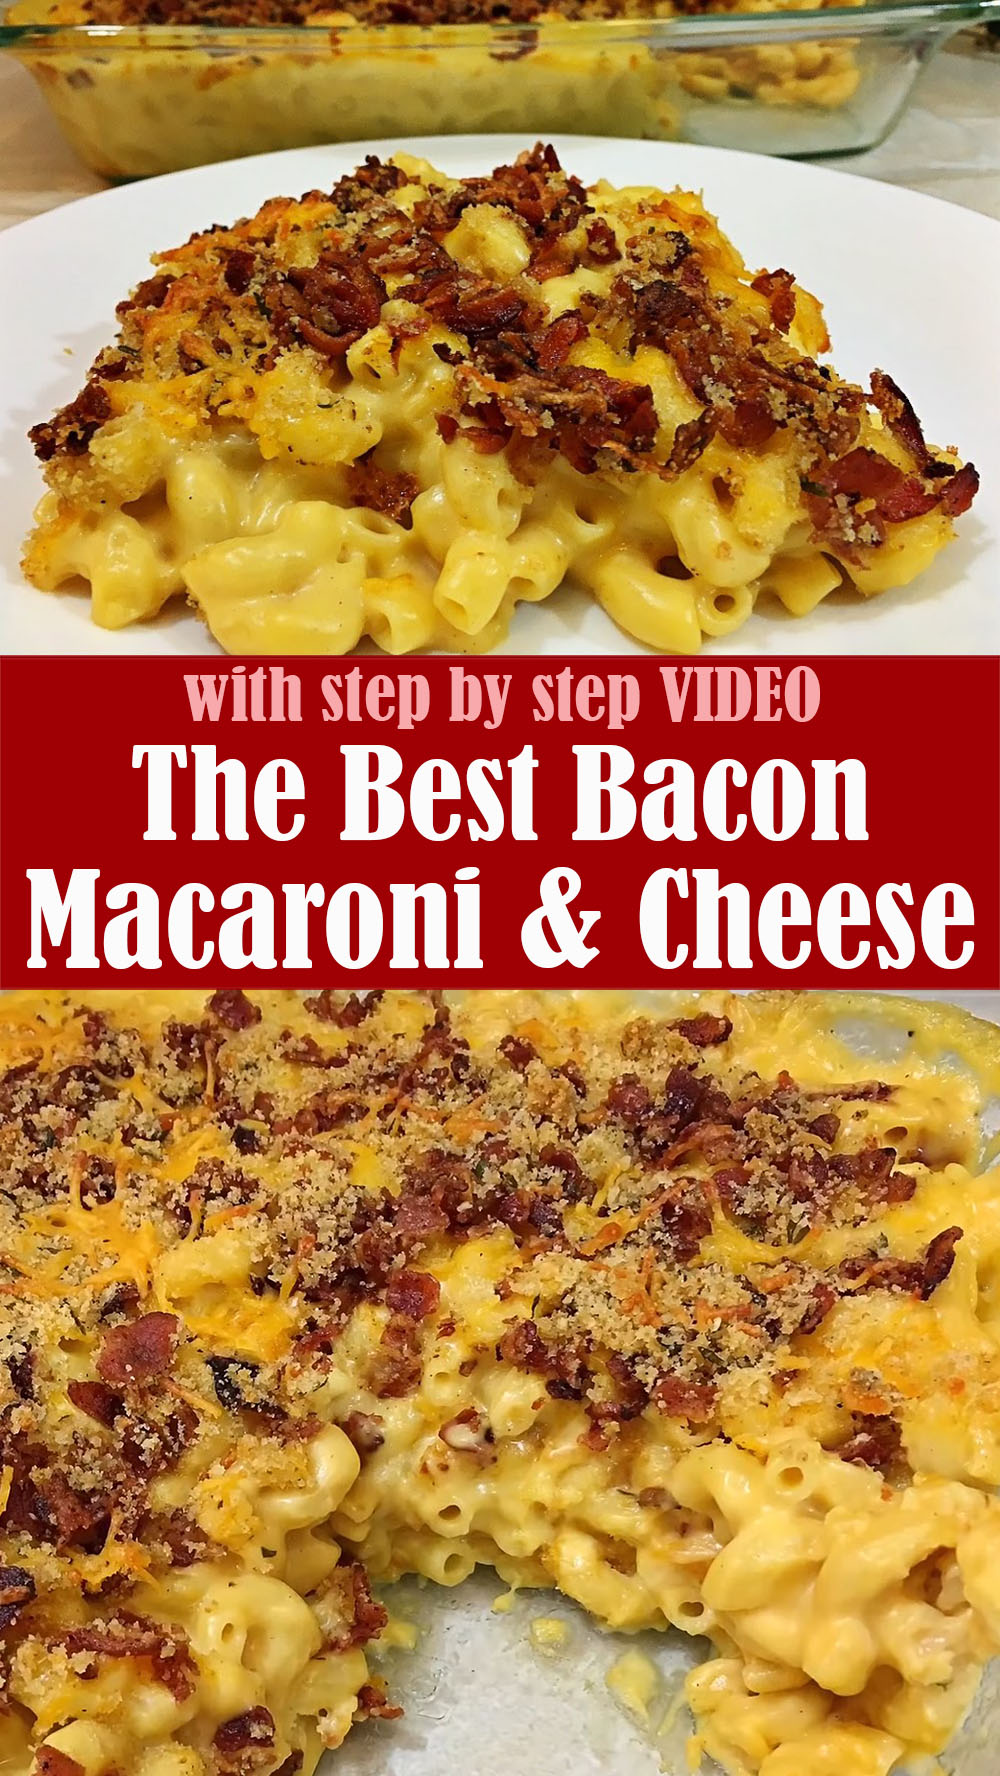 The Best Bacon Macaroni and Cheese Recipe